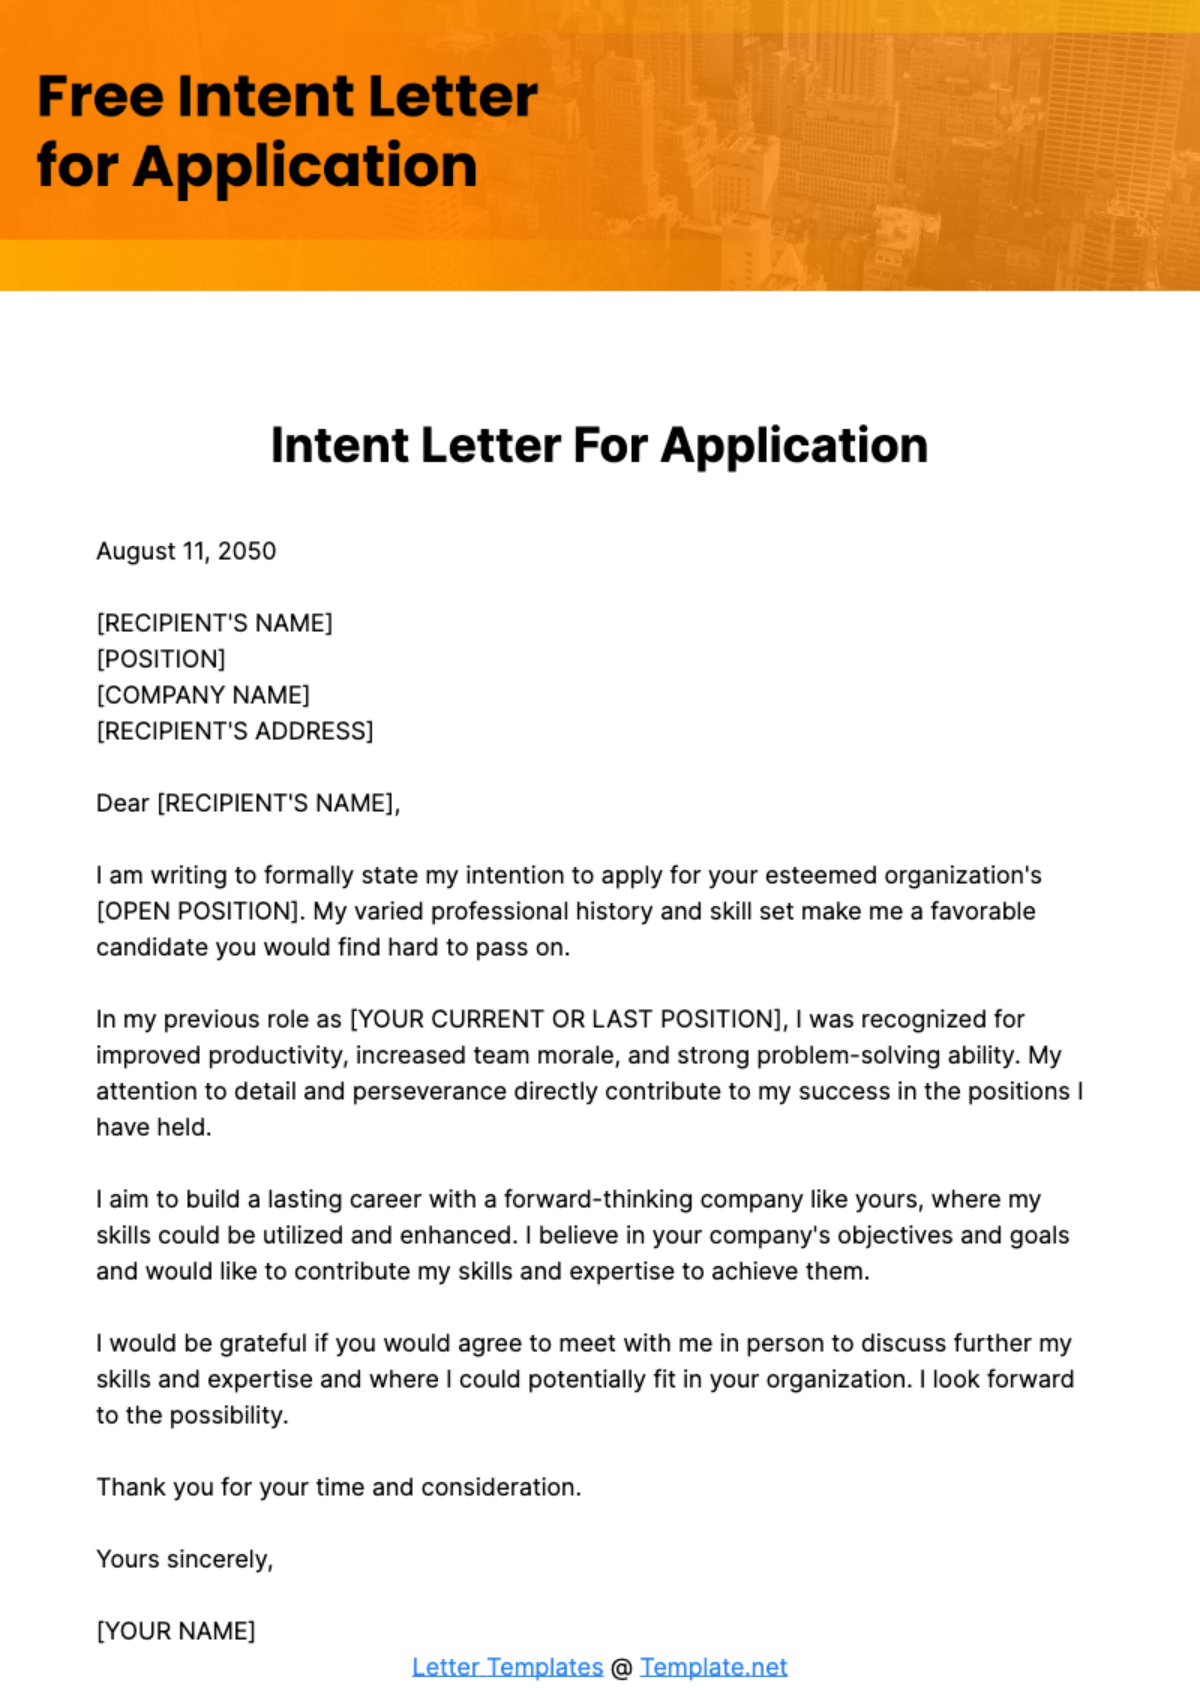 Free Intent Letter for Application Template